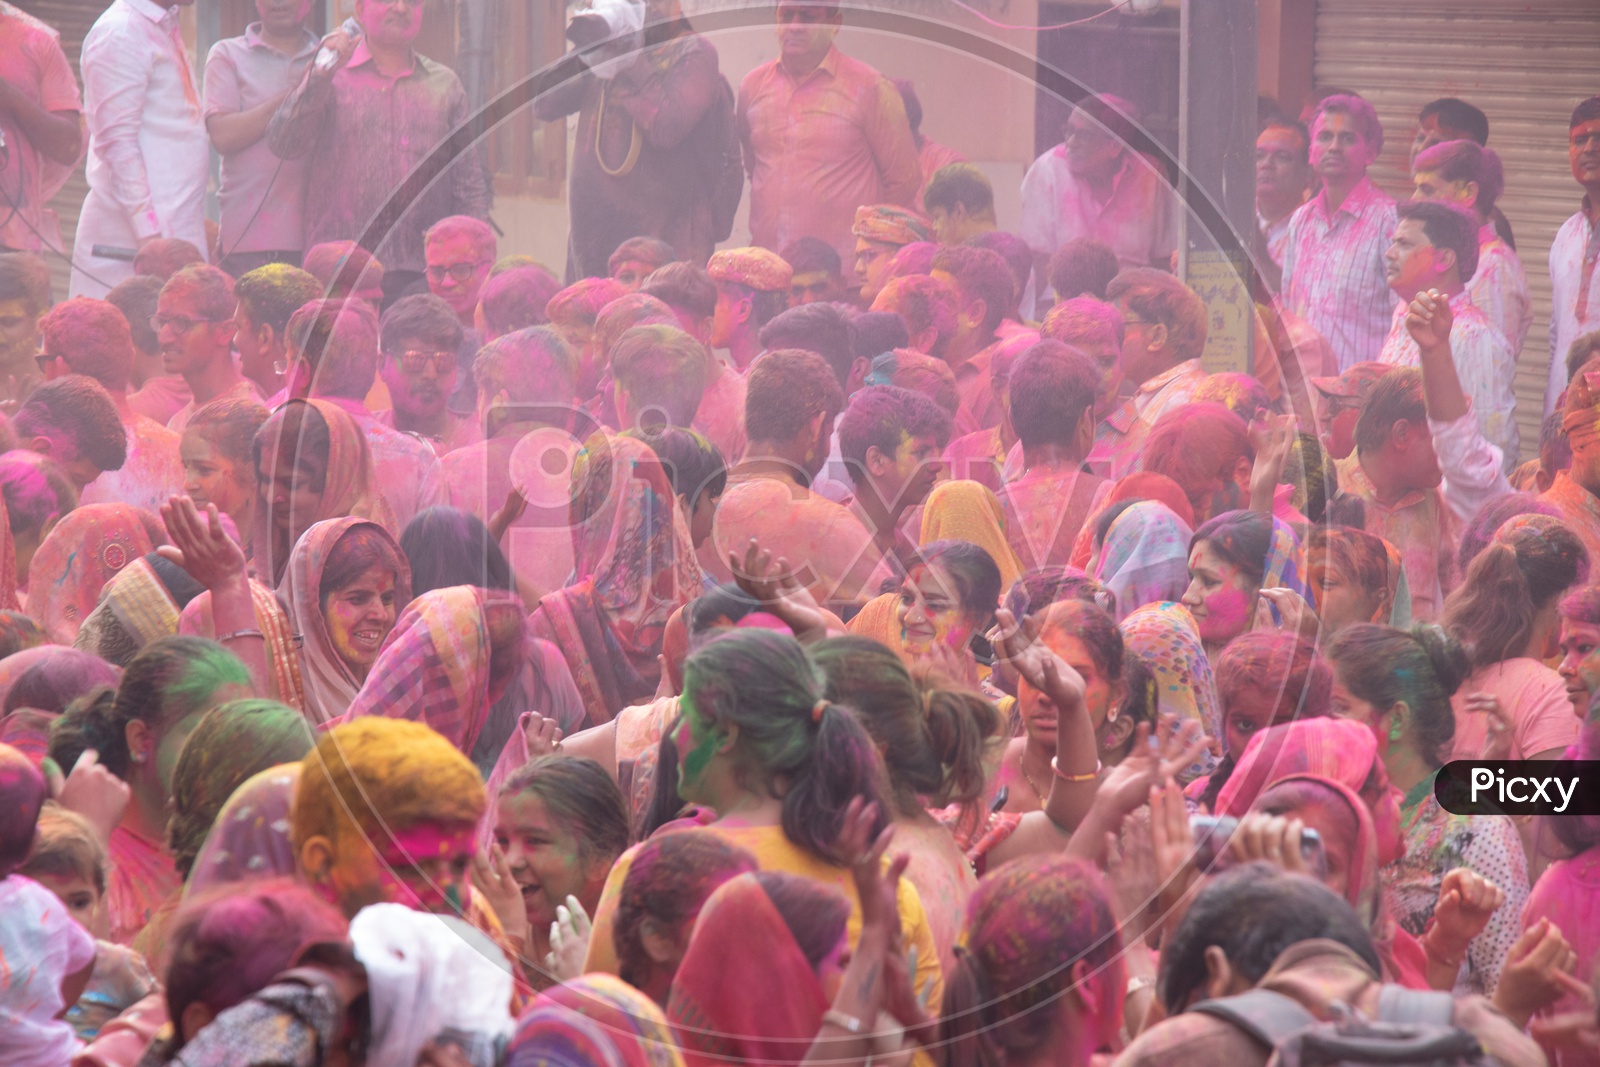 Crowd Of Unidentified Indian People Celebrating Holi Festival by Filling In Colors